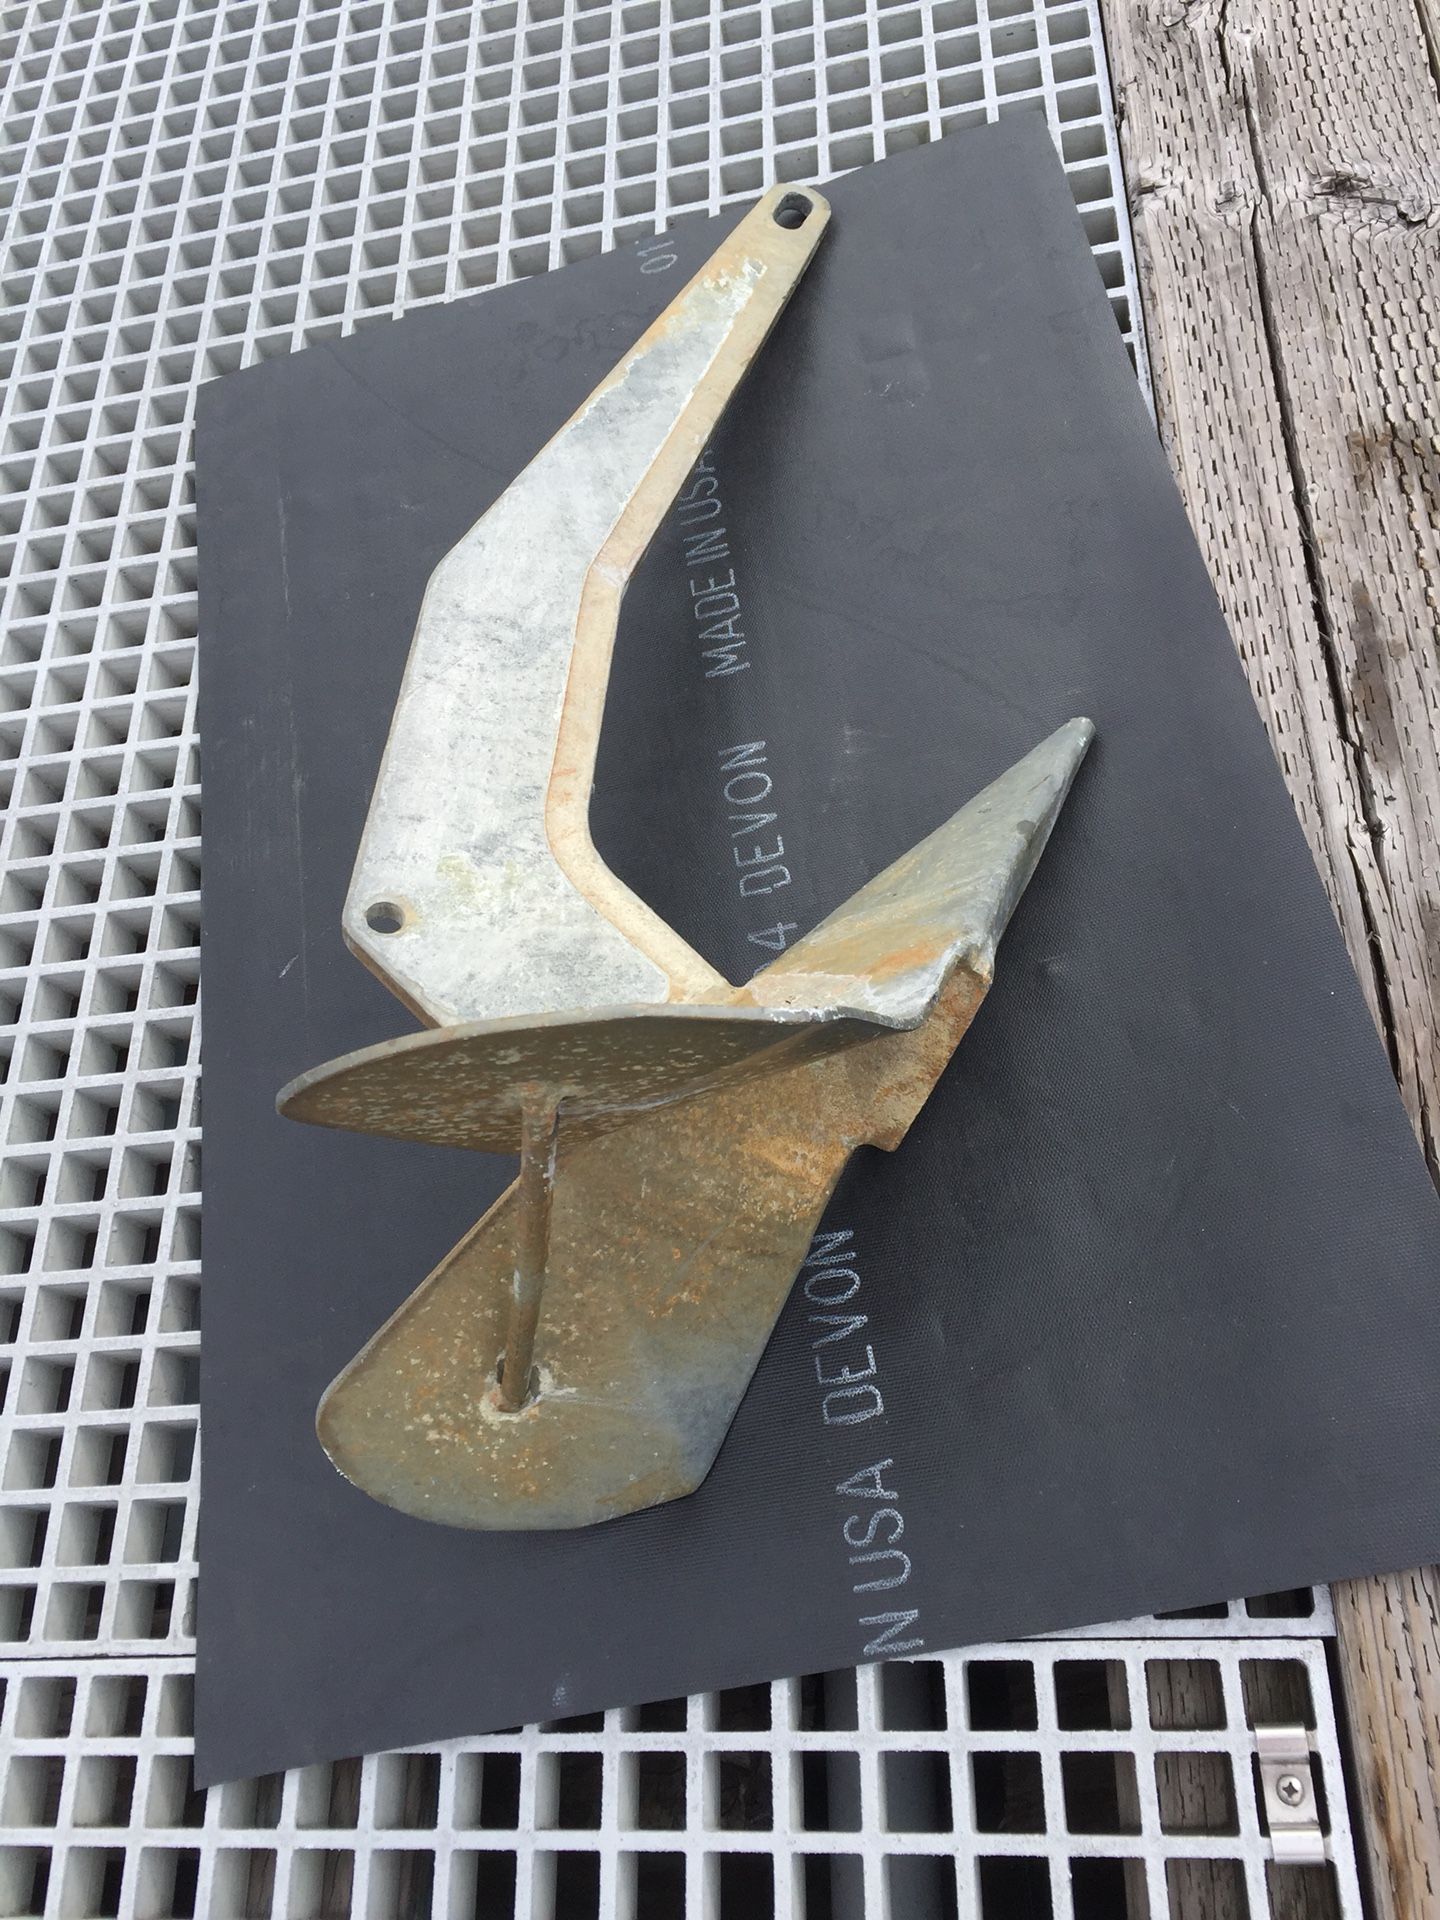 Lewmar 35lb anchor from 40’ yacht